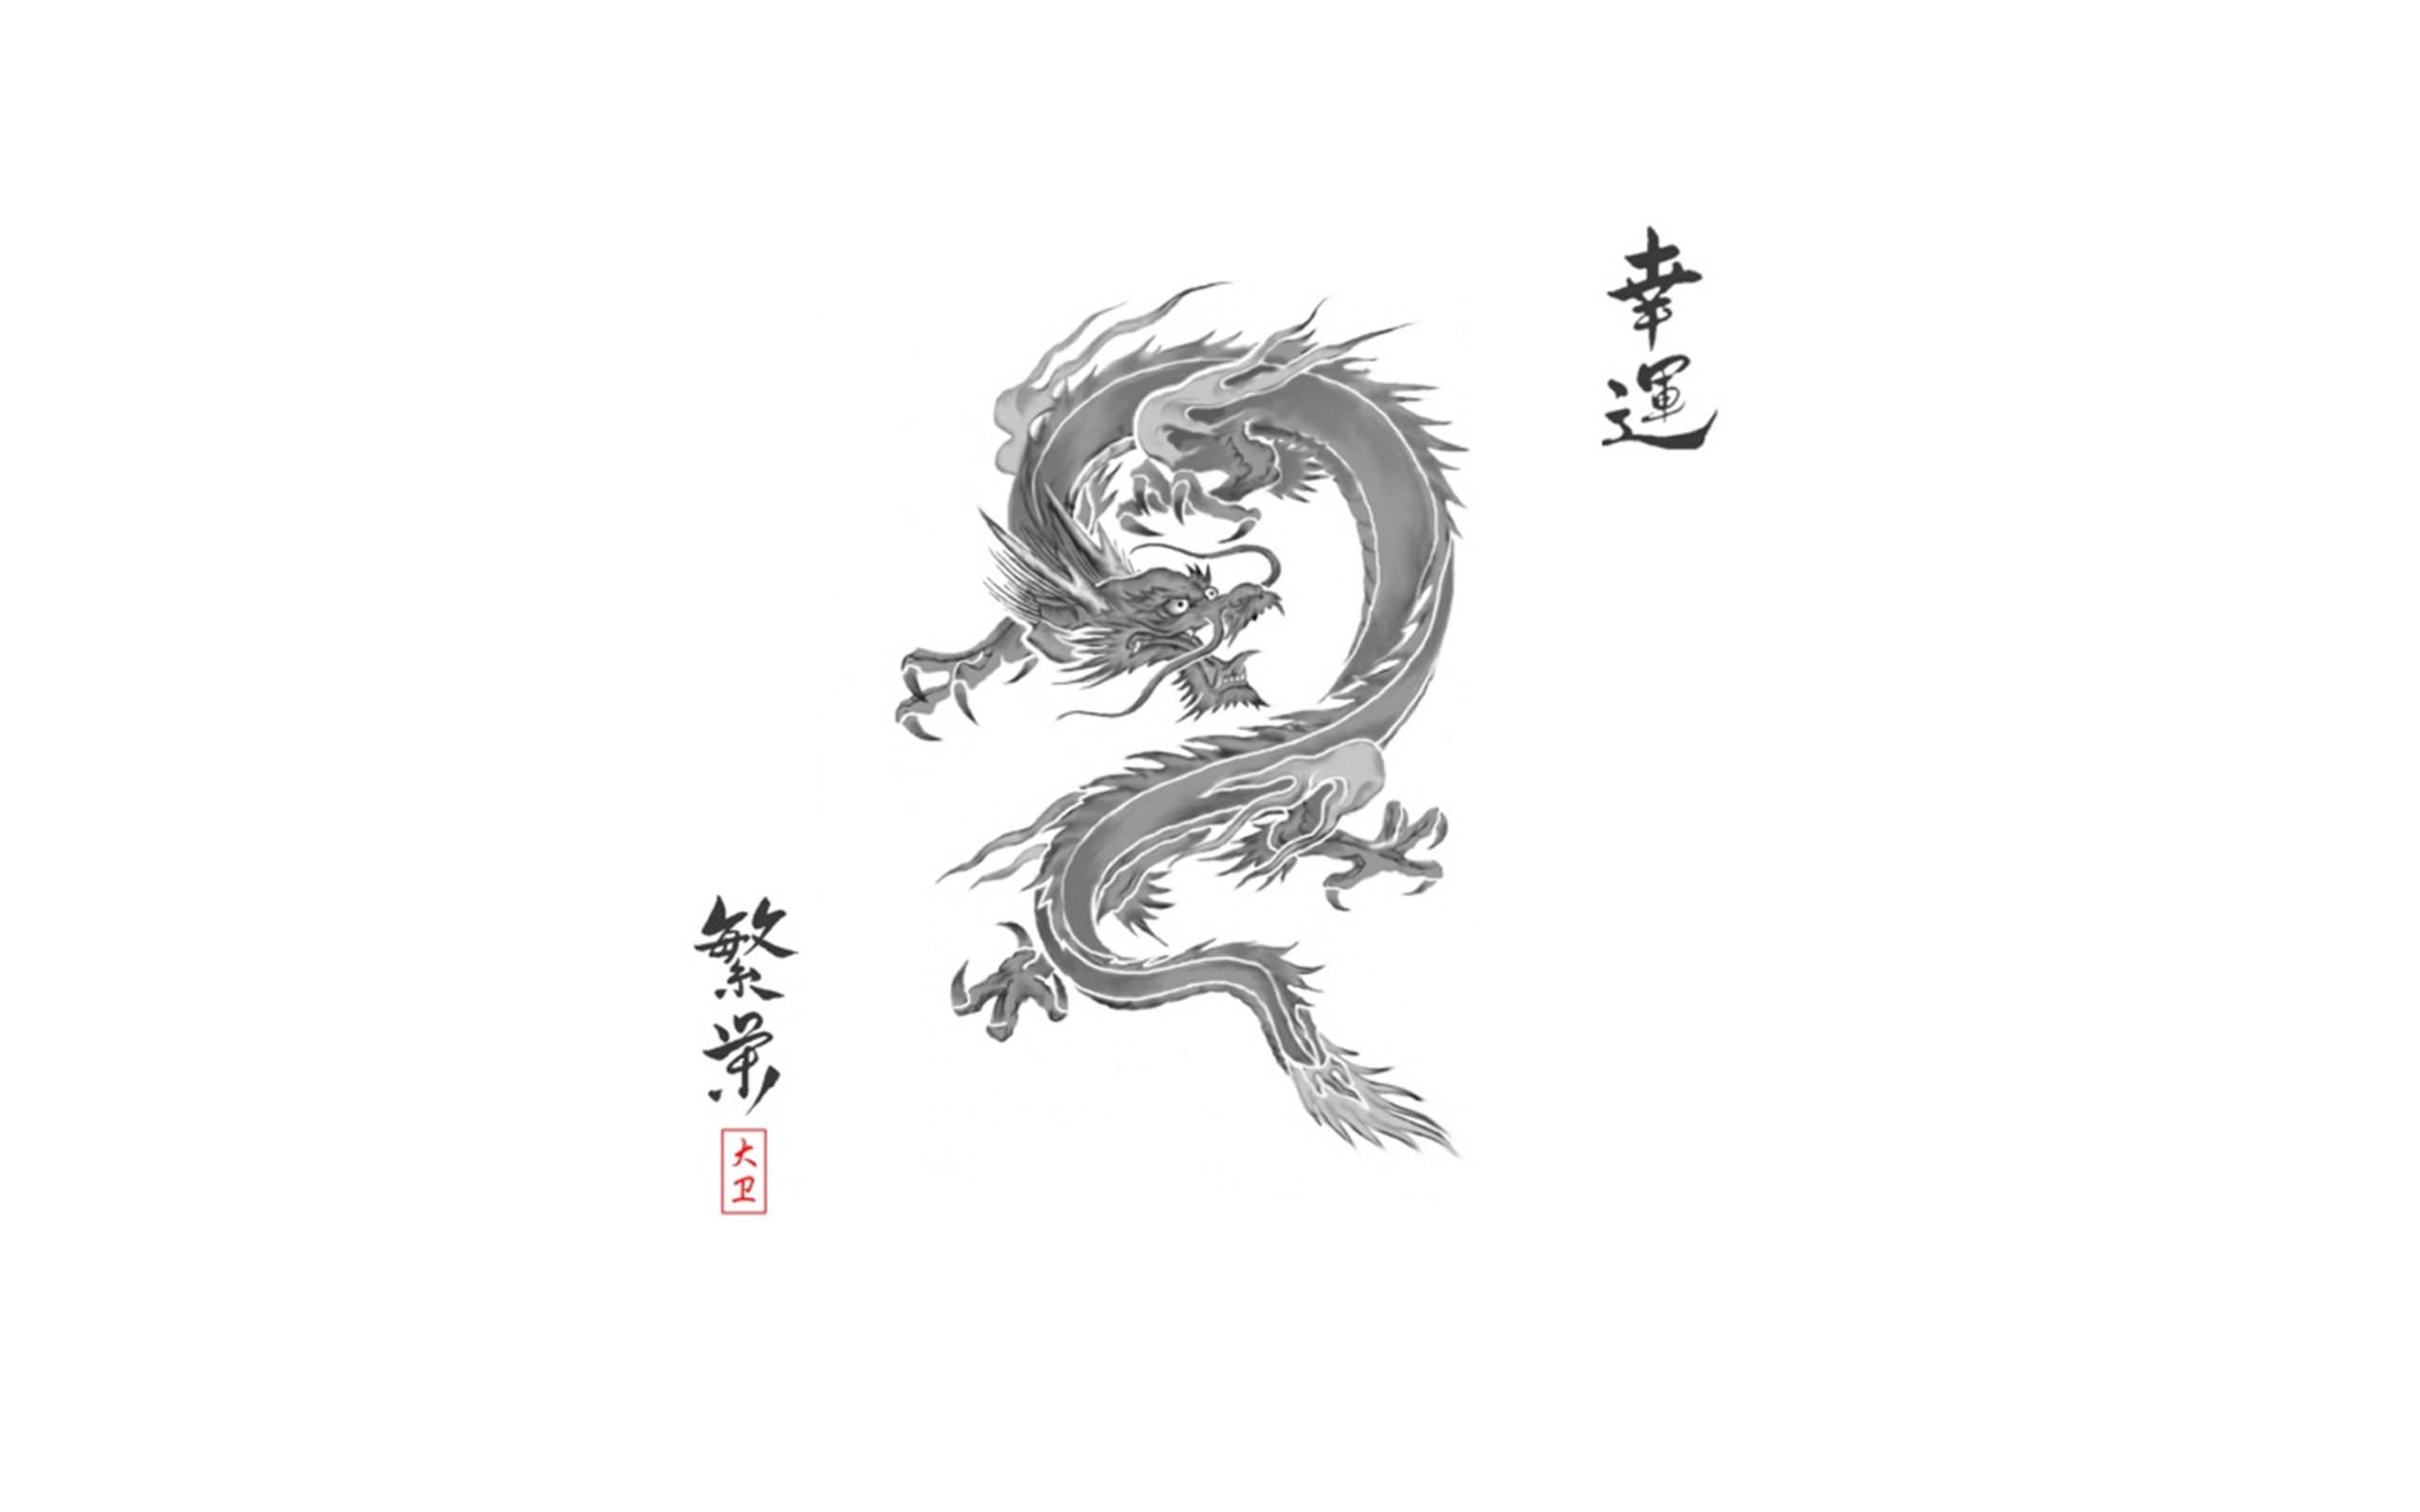 Chinese Dragon wallpaper HD for desktop background